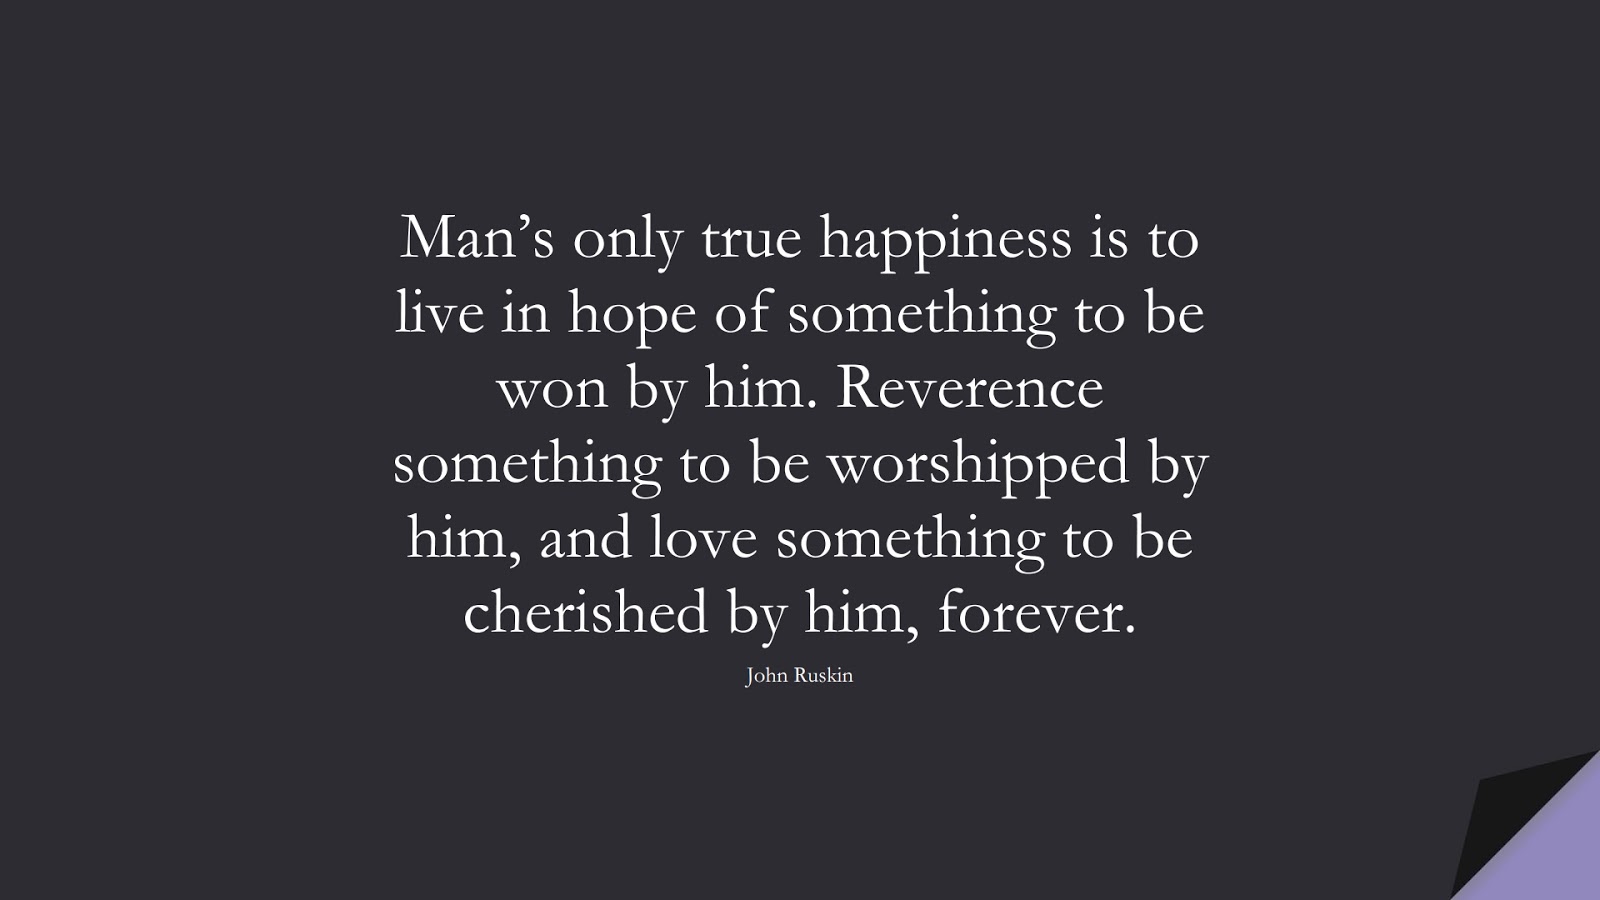 Man’s only true happiness is to live in hope of something to be won by him. Reverence something to be worshipped by him, and love something to be cherished by him, forever. (John Ruskin);  #HappinessQuotes